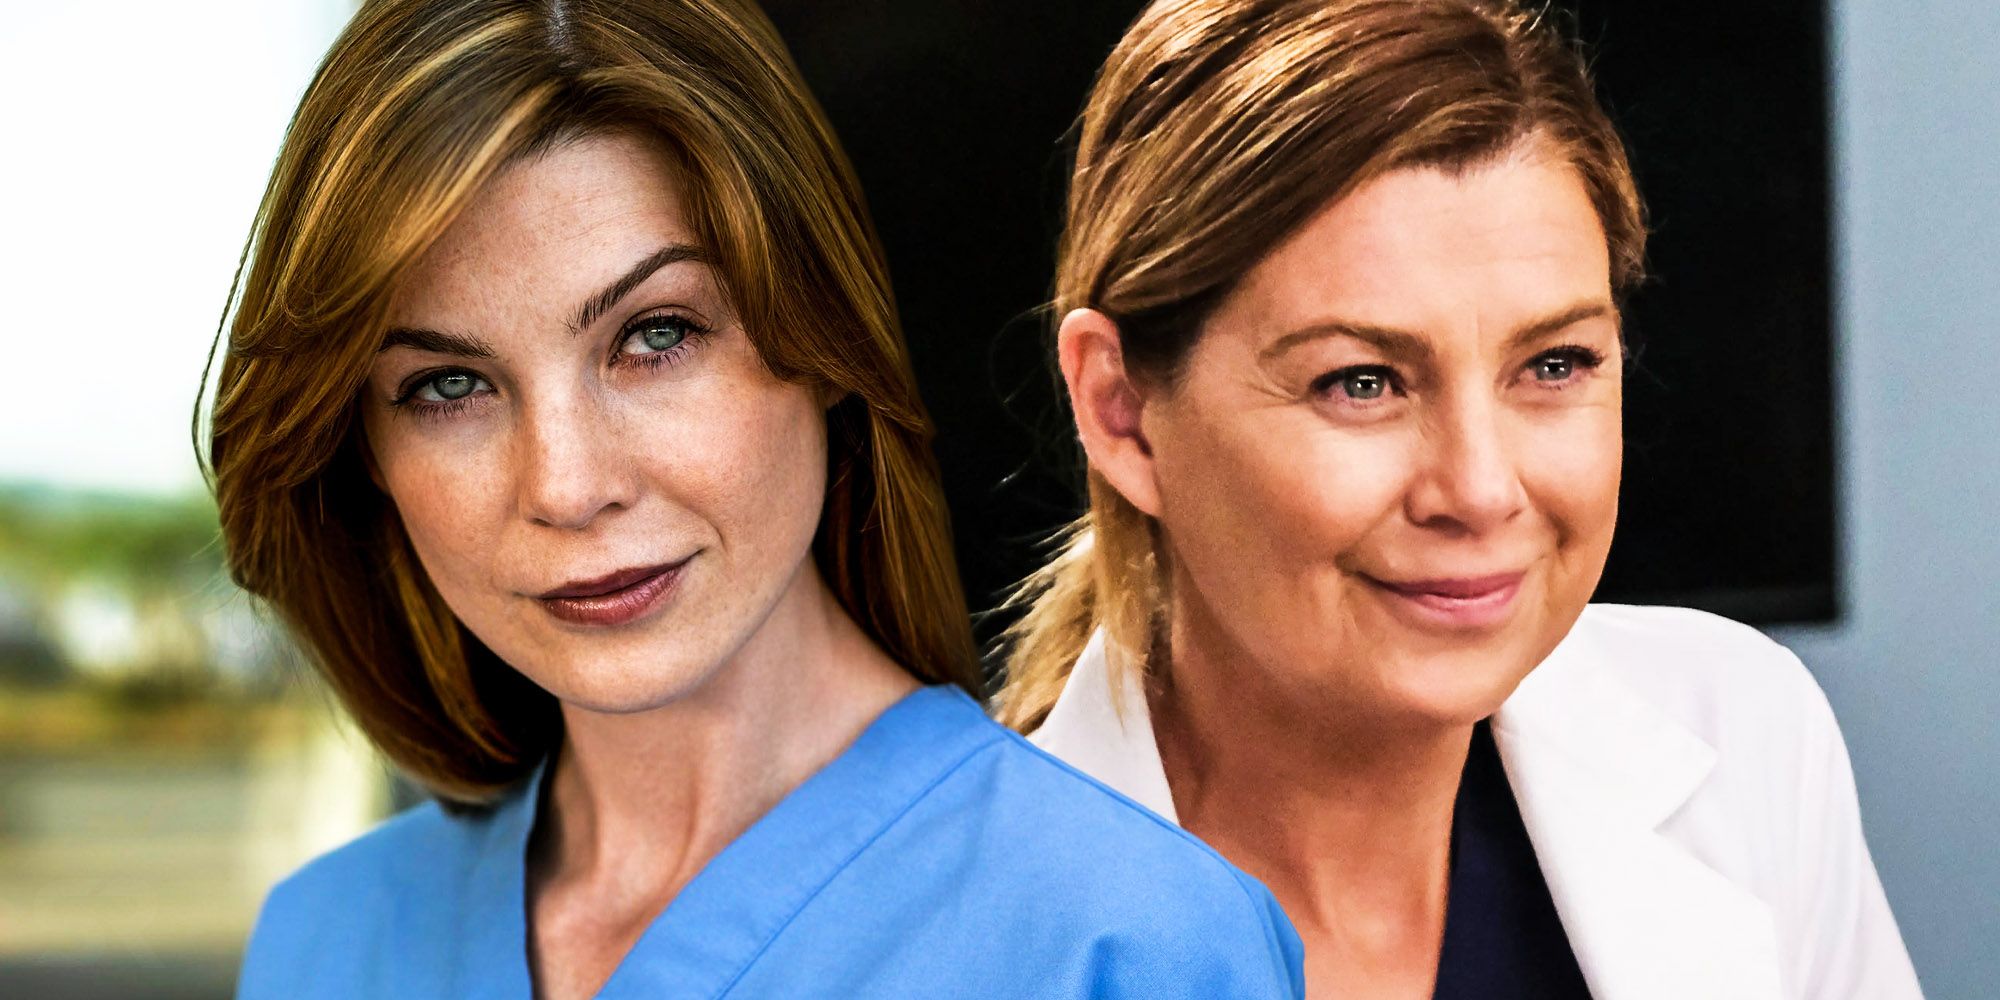 Grey's Anatomy: How Old Meredith Is (From Season 1-17)